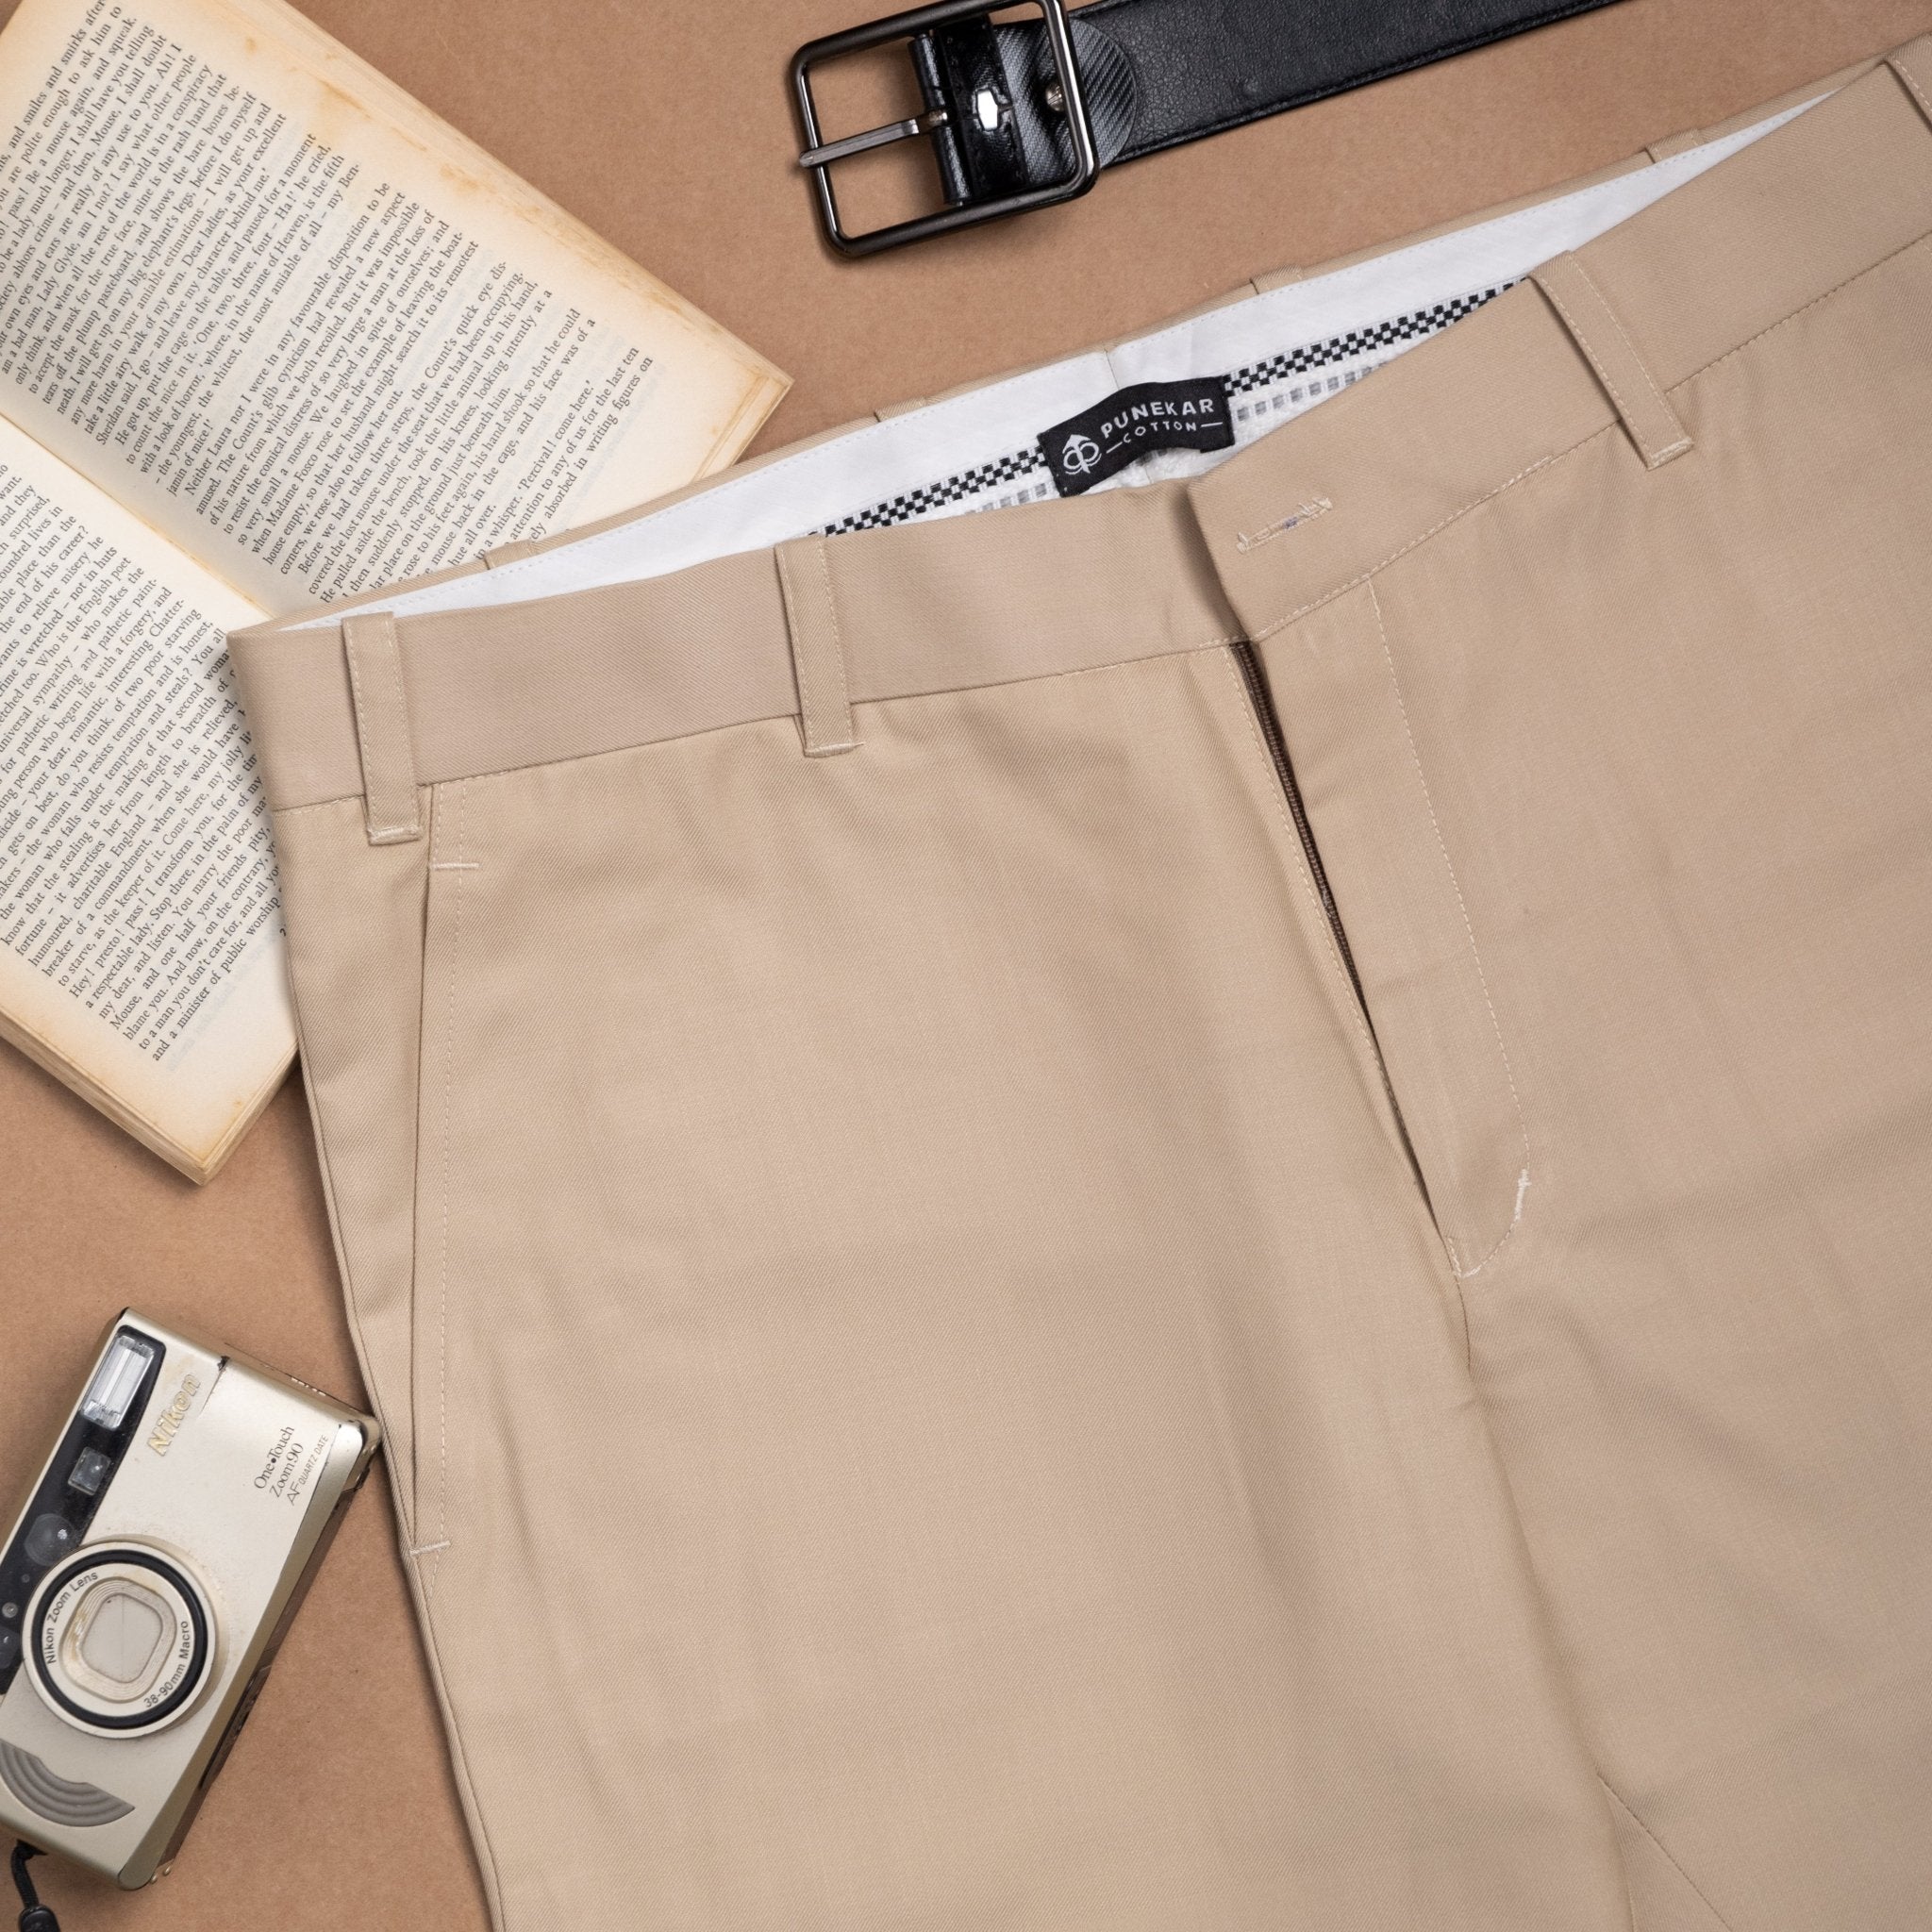 19 Pairs of Beige Trousers You Can Style Hundreds of Ways | Who What Wear